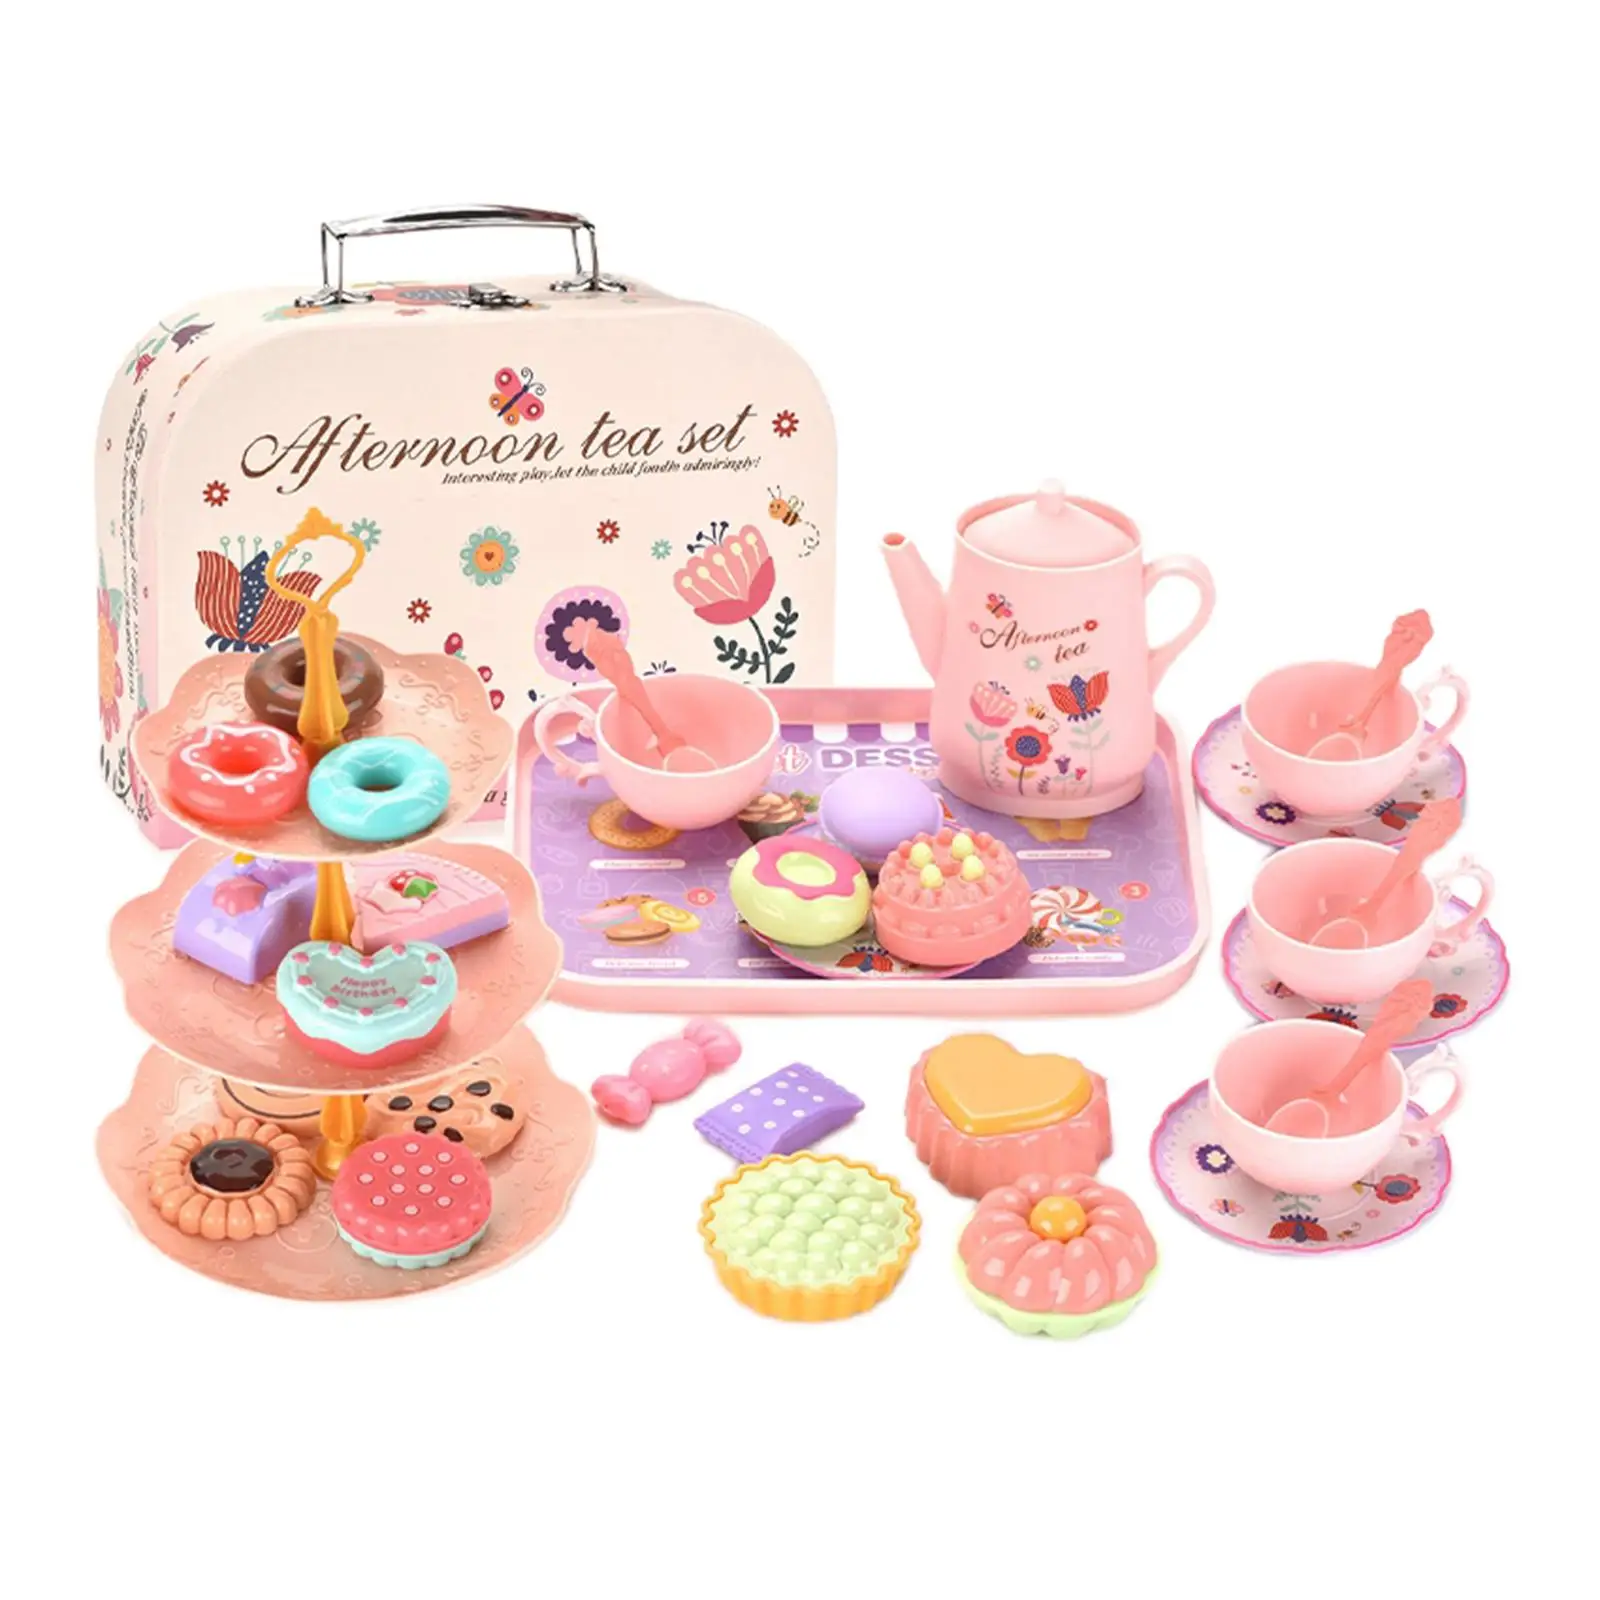 Simulation Tea Cake Set Developmental Gifts Play House Kitchen Afternoon Tea Game for Children Baby Boys Kids Party